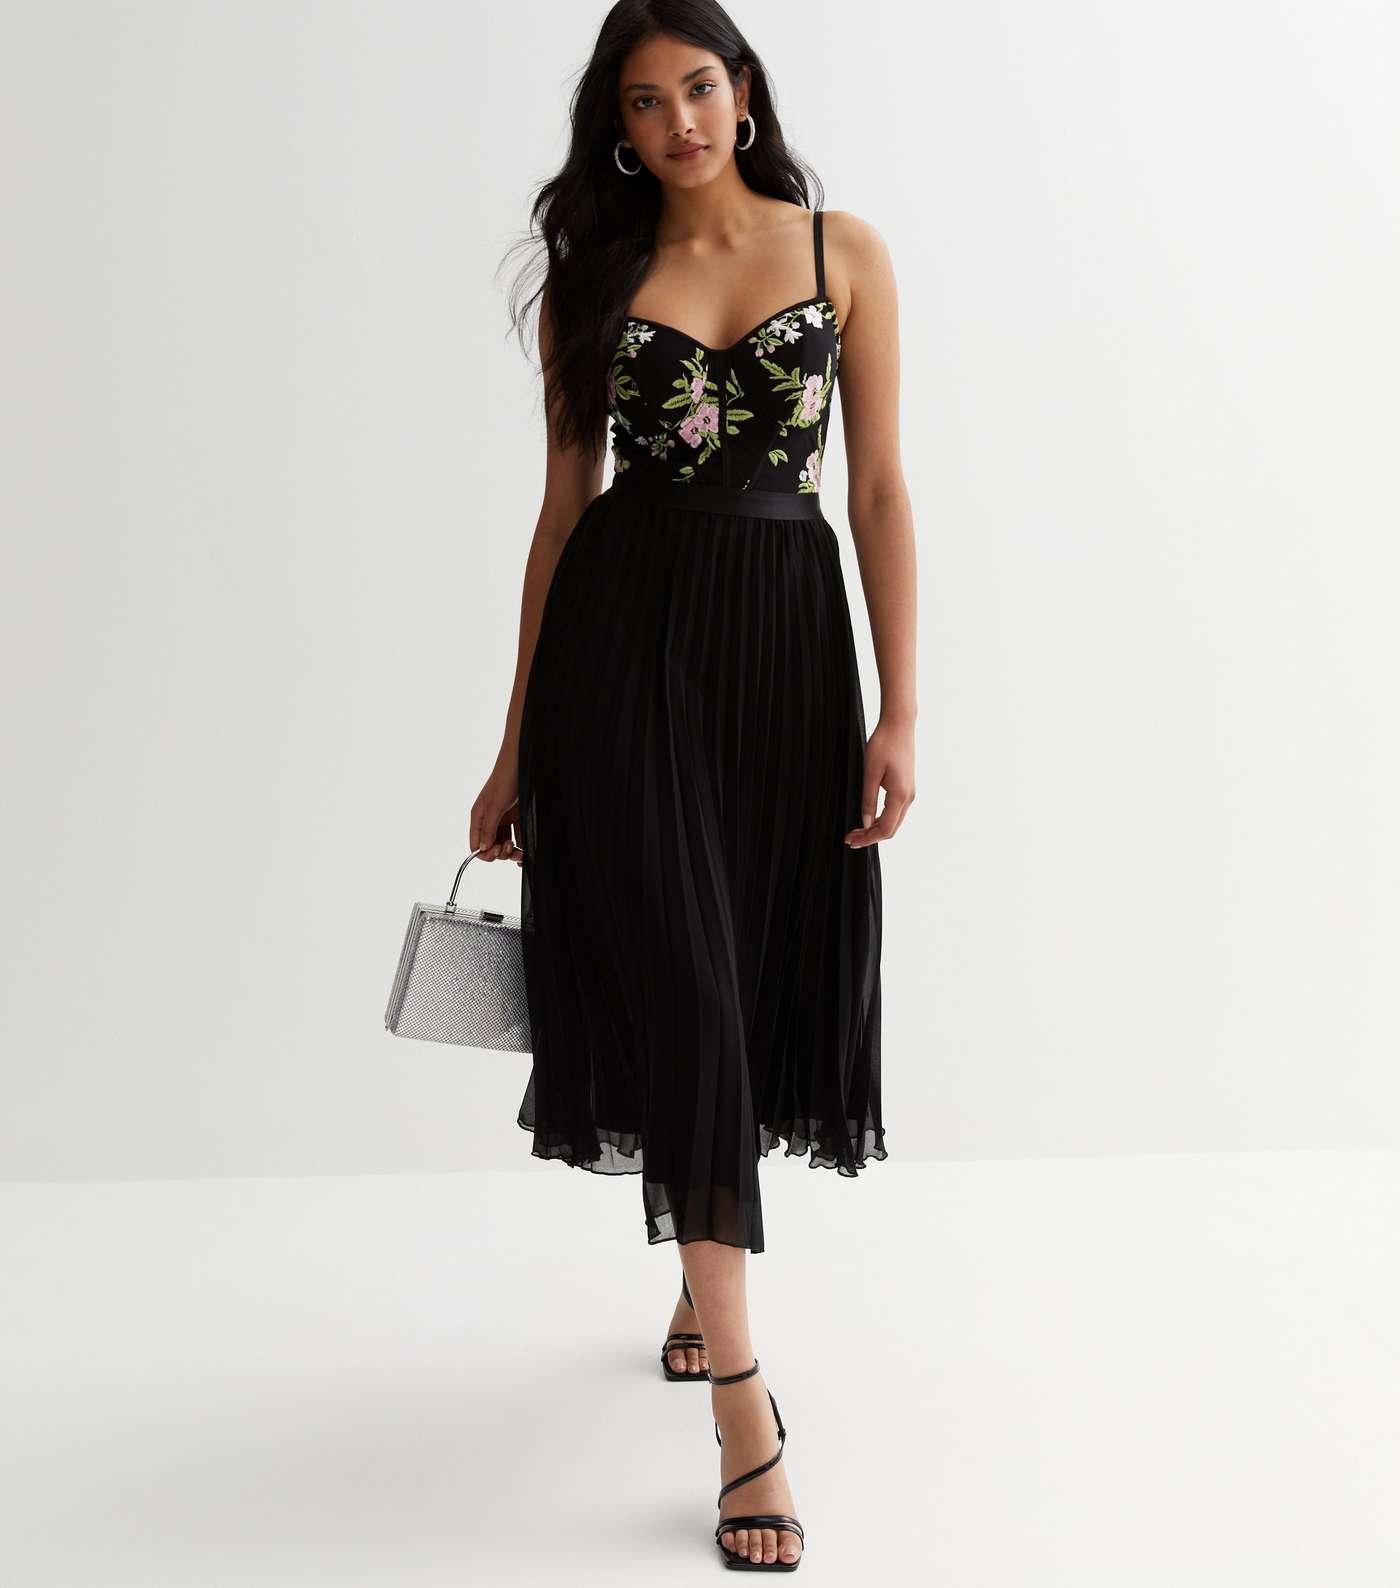 Black Floral Embroidered Bustier Strappy Midi Dress Image 2